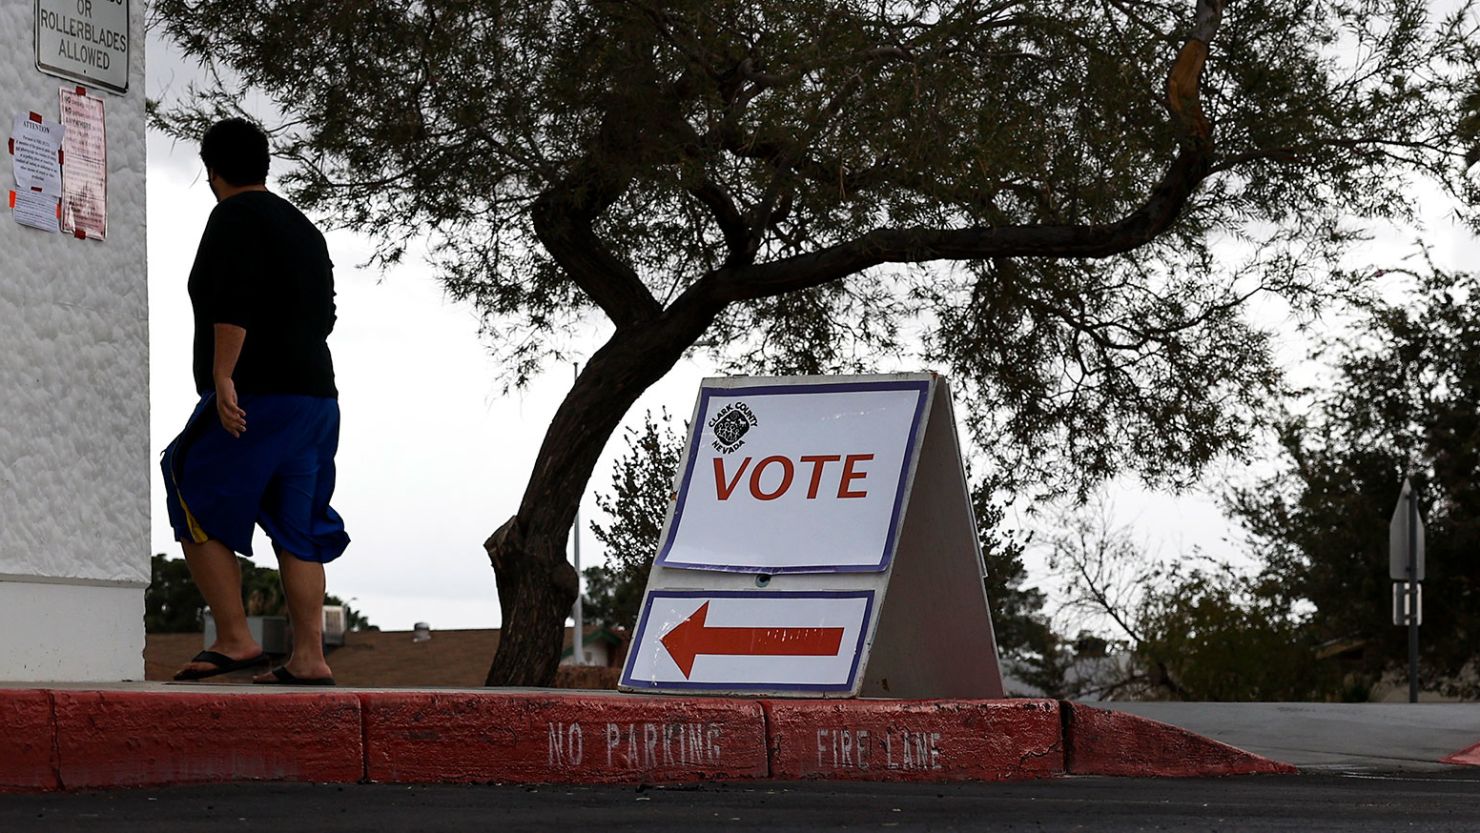 LAS VEGAS, NEVADA - NOVEMBER 08: A voters arrives at a polling center at Doris Reed Elementary School on November 08, 2022 in Las Vegas, Nevada. After months of candidates campaigning, Americans are voting in the midterm elections to decide close races across the nation.